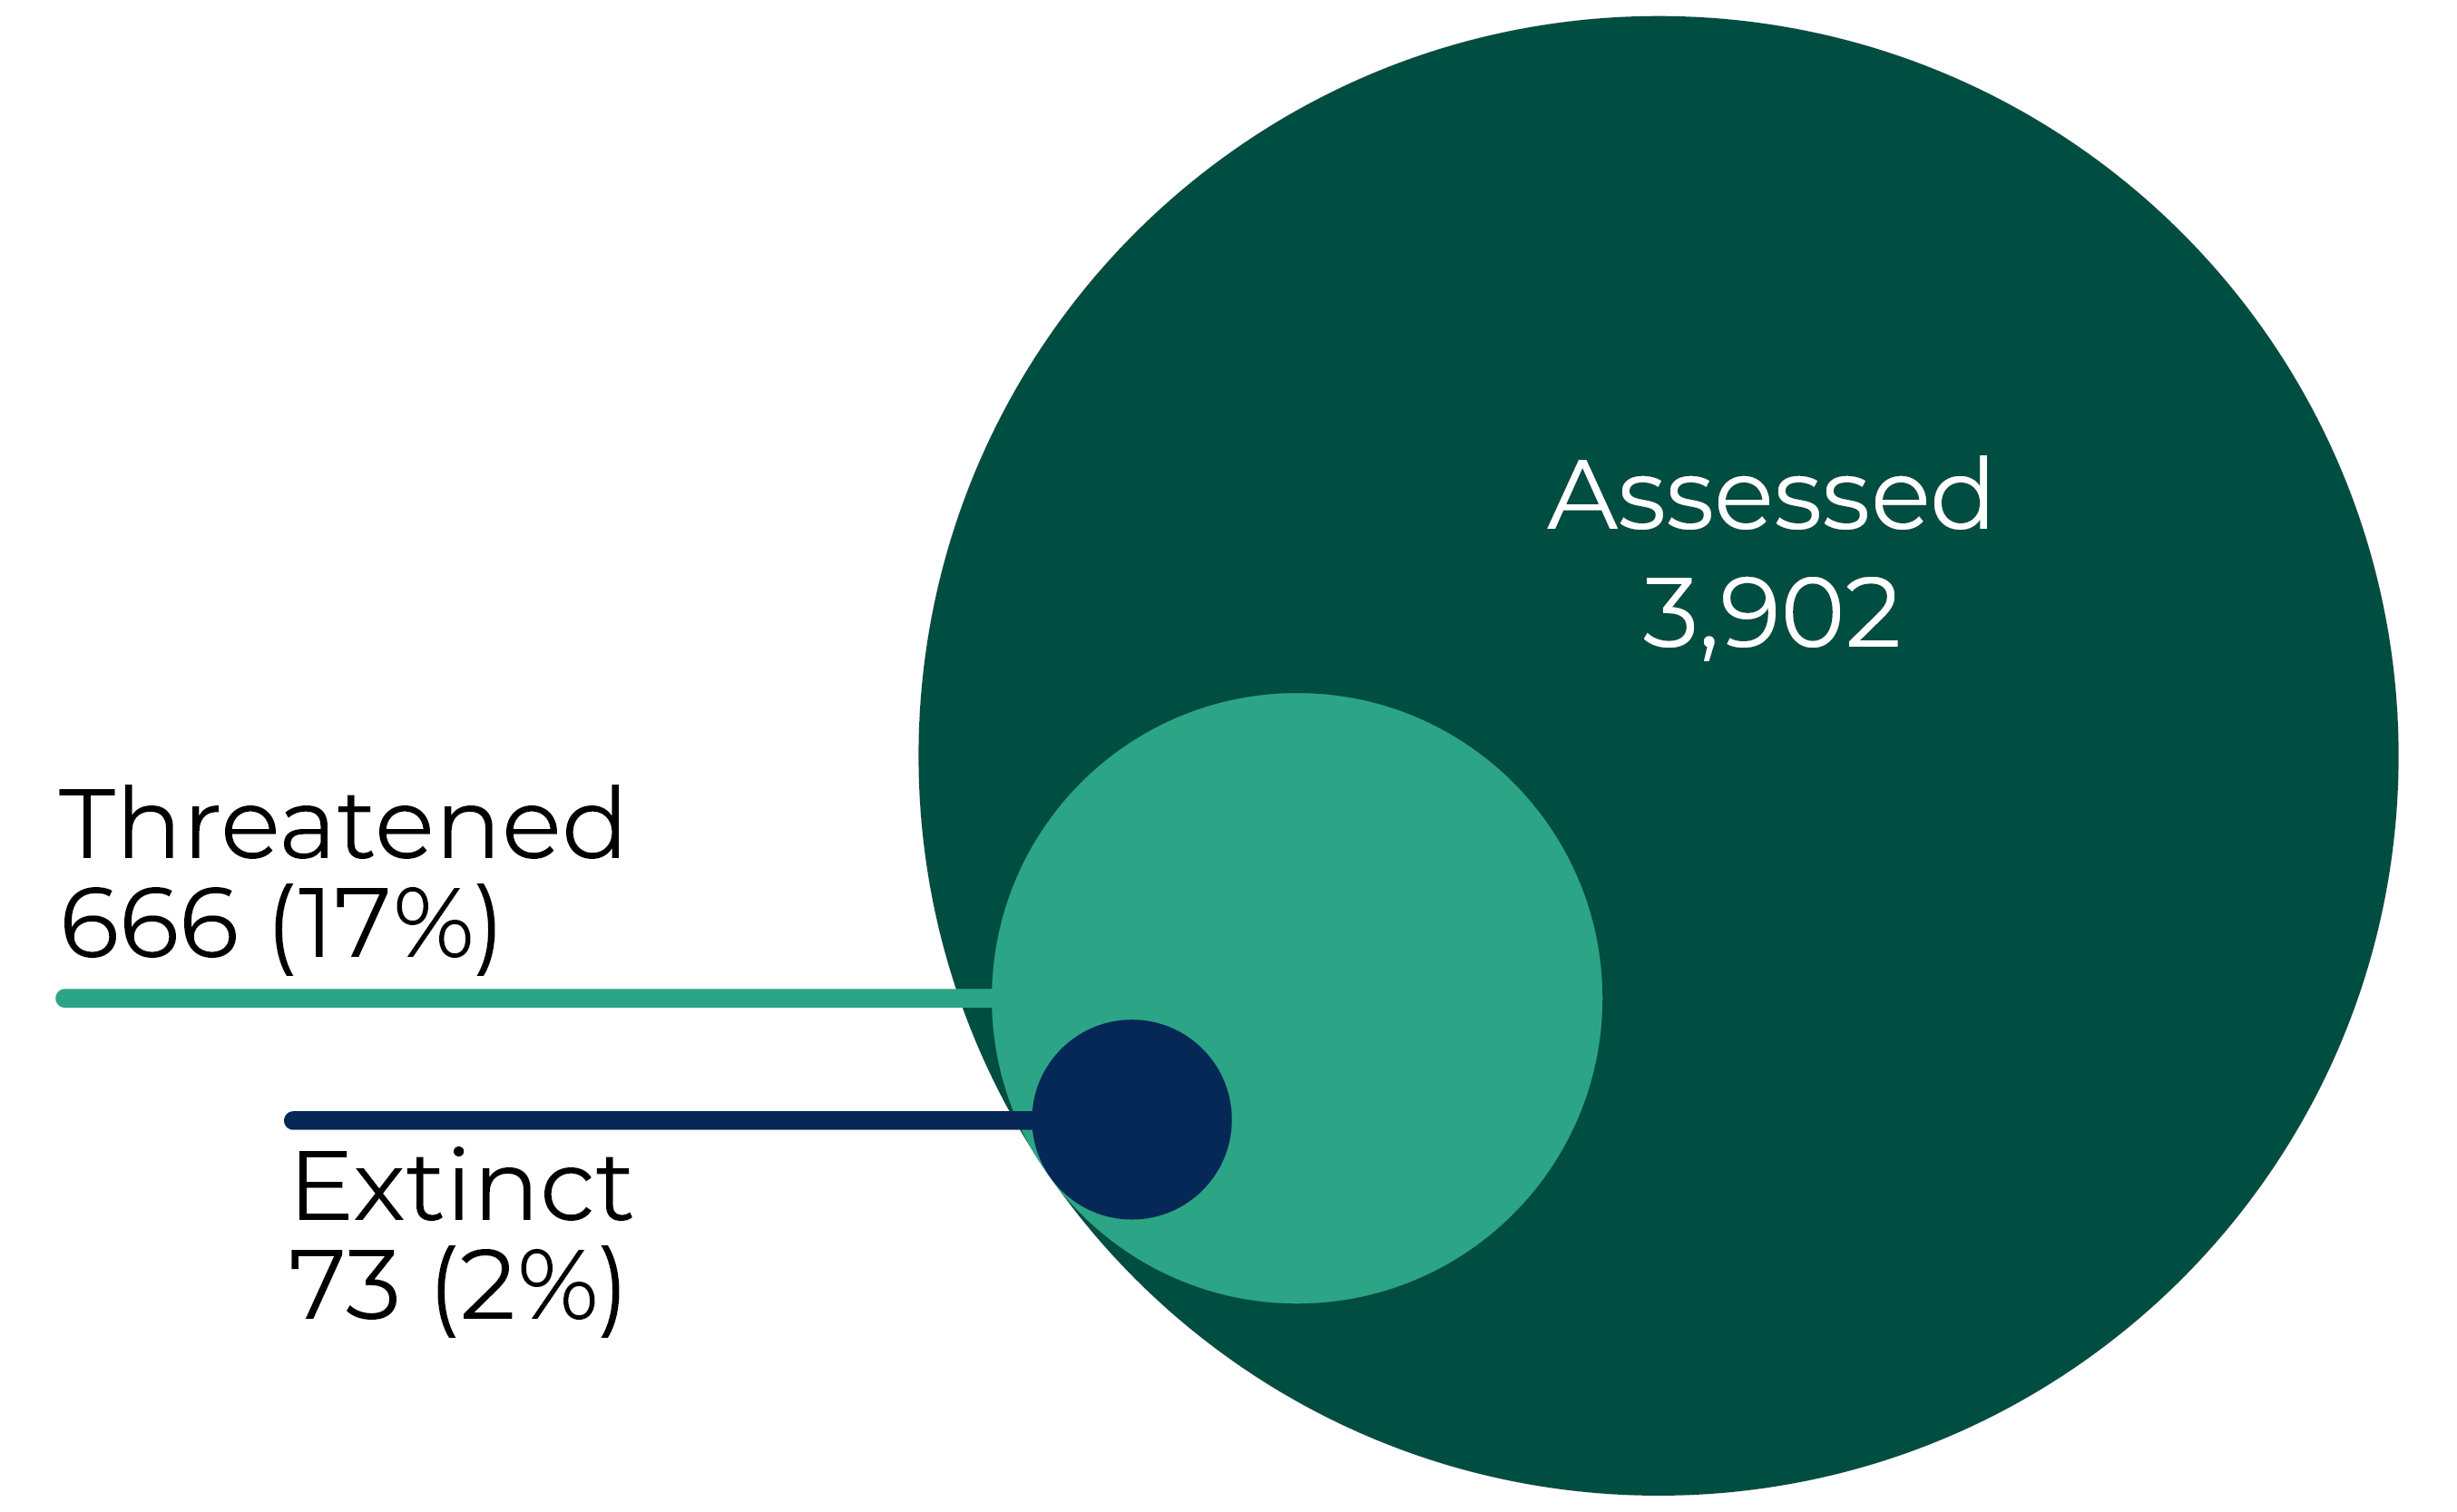 Graphic showing that of 3902 species assessed, 666 (17%) are threatened and 73 (2%) are extinct.